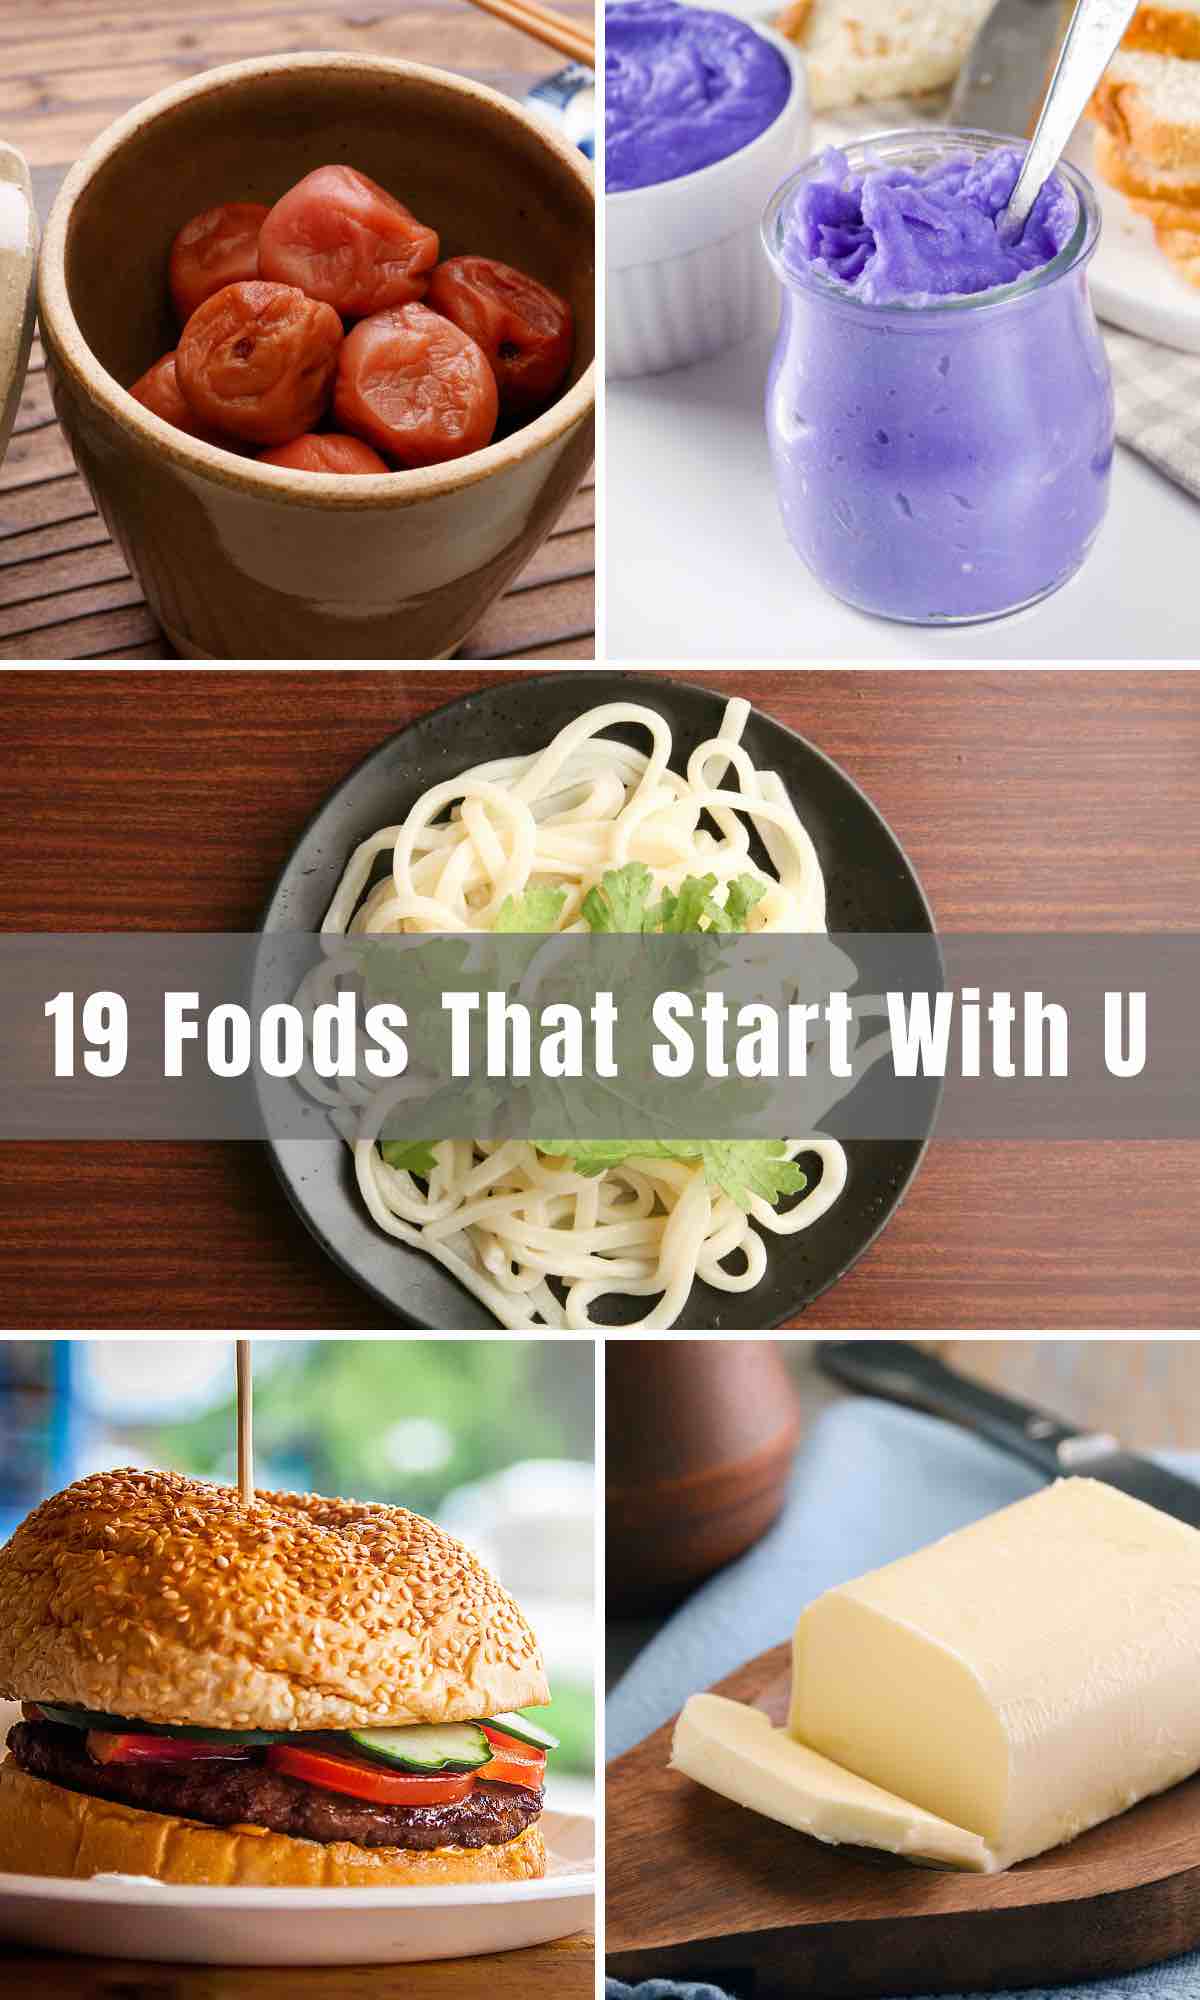 Looking for foods that start with U? Whether it’s Categories, or even just Scrabble, it can be daunting to get a less commonly used letter. U’ joins the difficult letter group, but I’ve still found 19 foods that start with it!